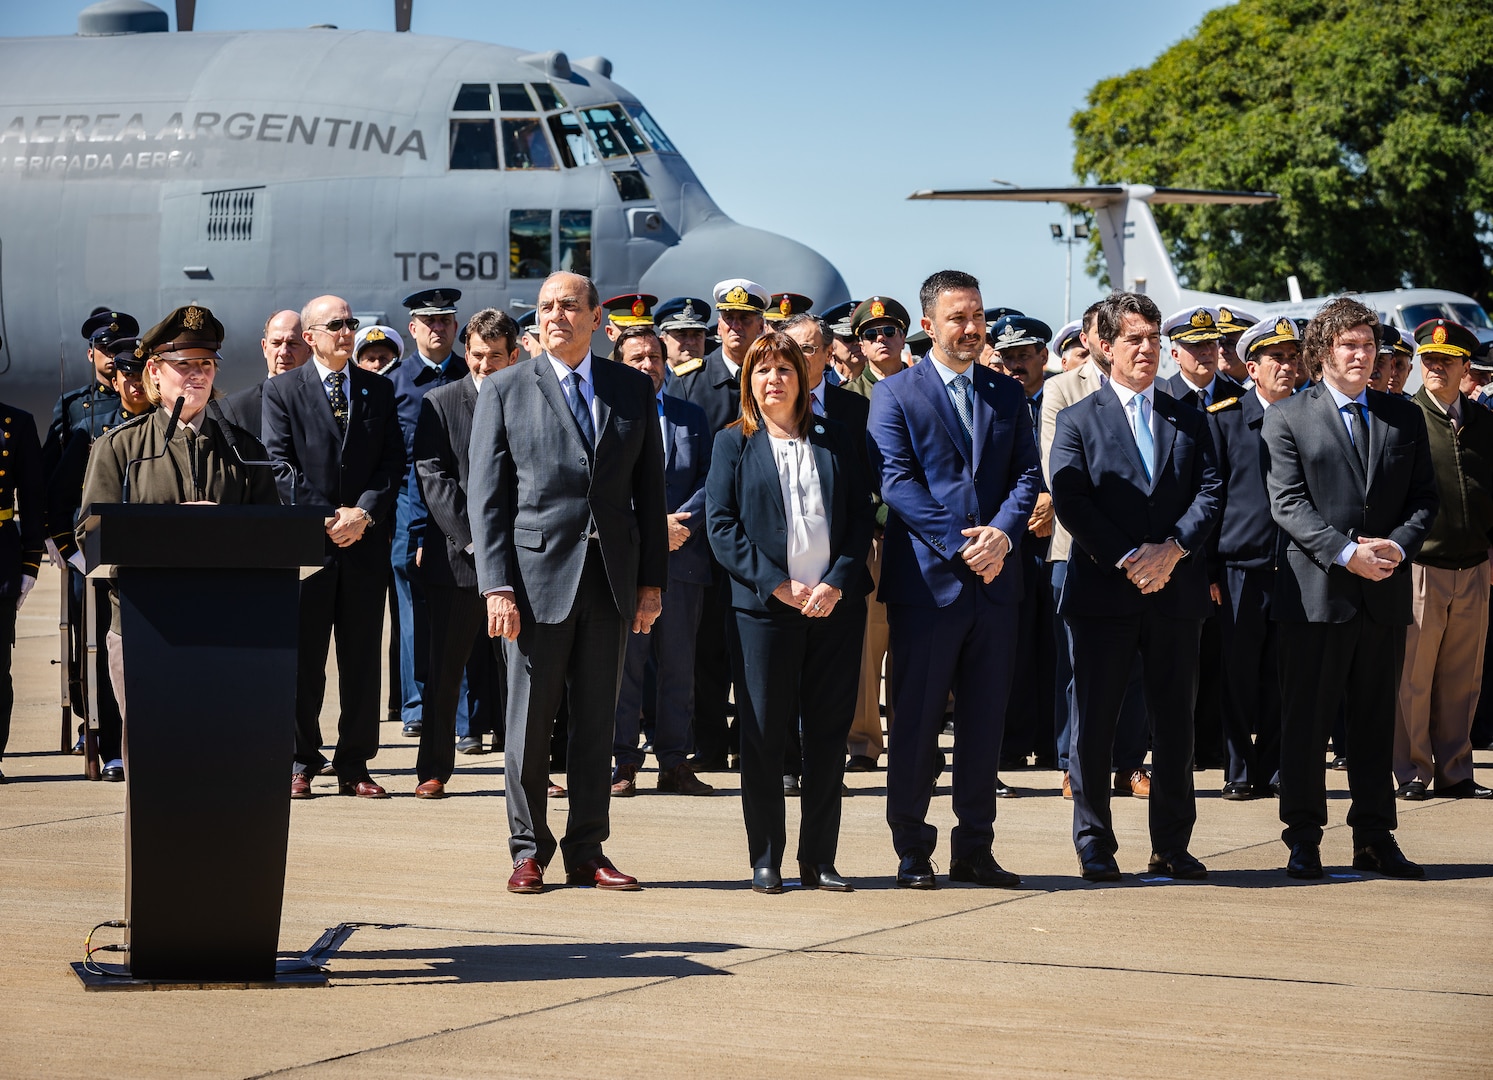 U.S. Army Gen. Laura Richardson, the commander of U.S. Southern Command (SOUTHCOM), delivers remarks during a ceremony highlighting the U.S.-provided donation of a C-130H Hercules.